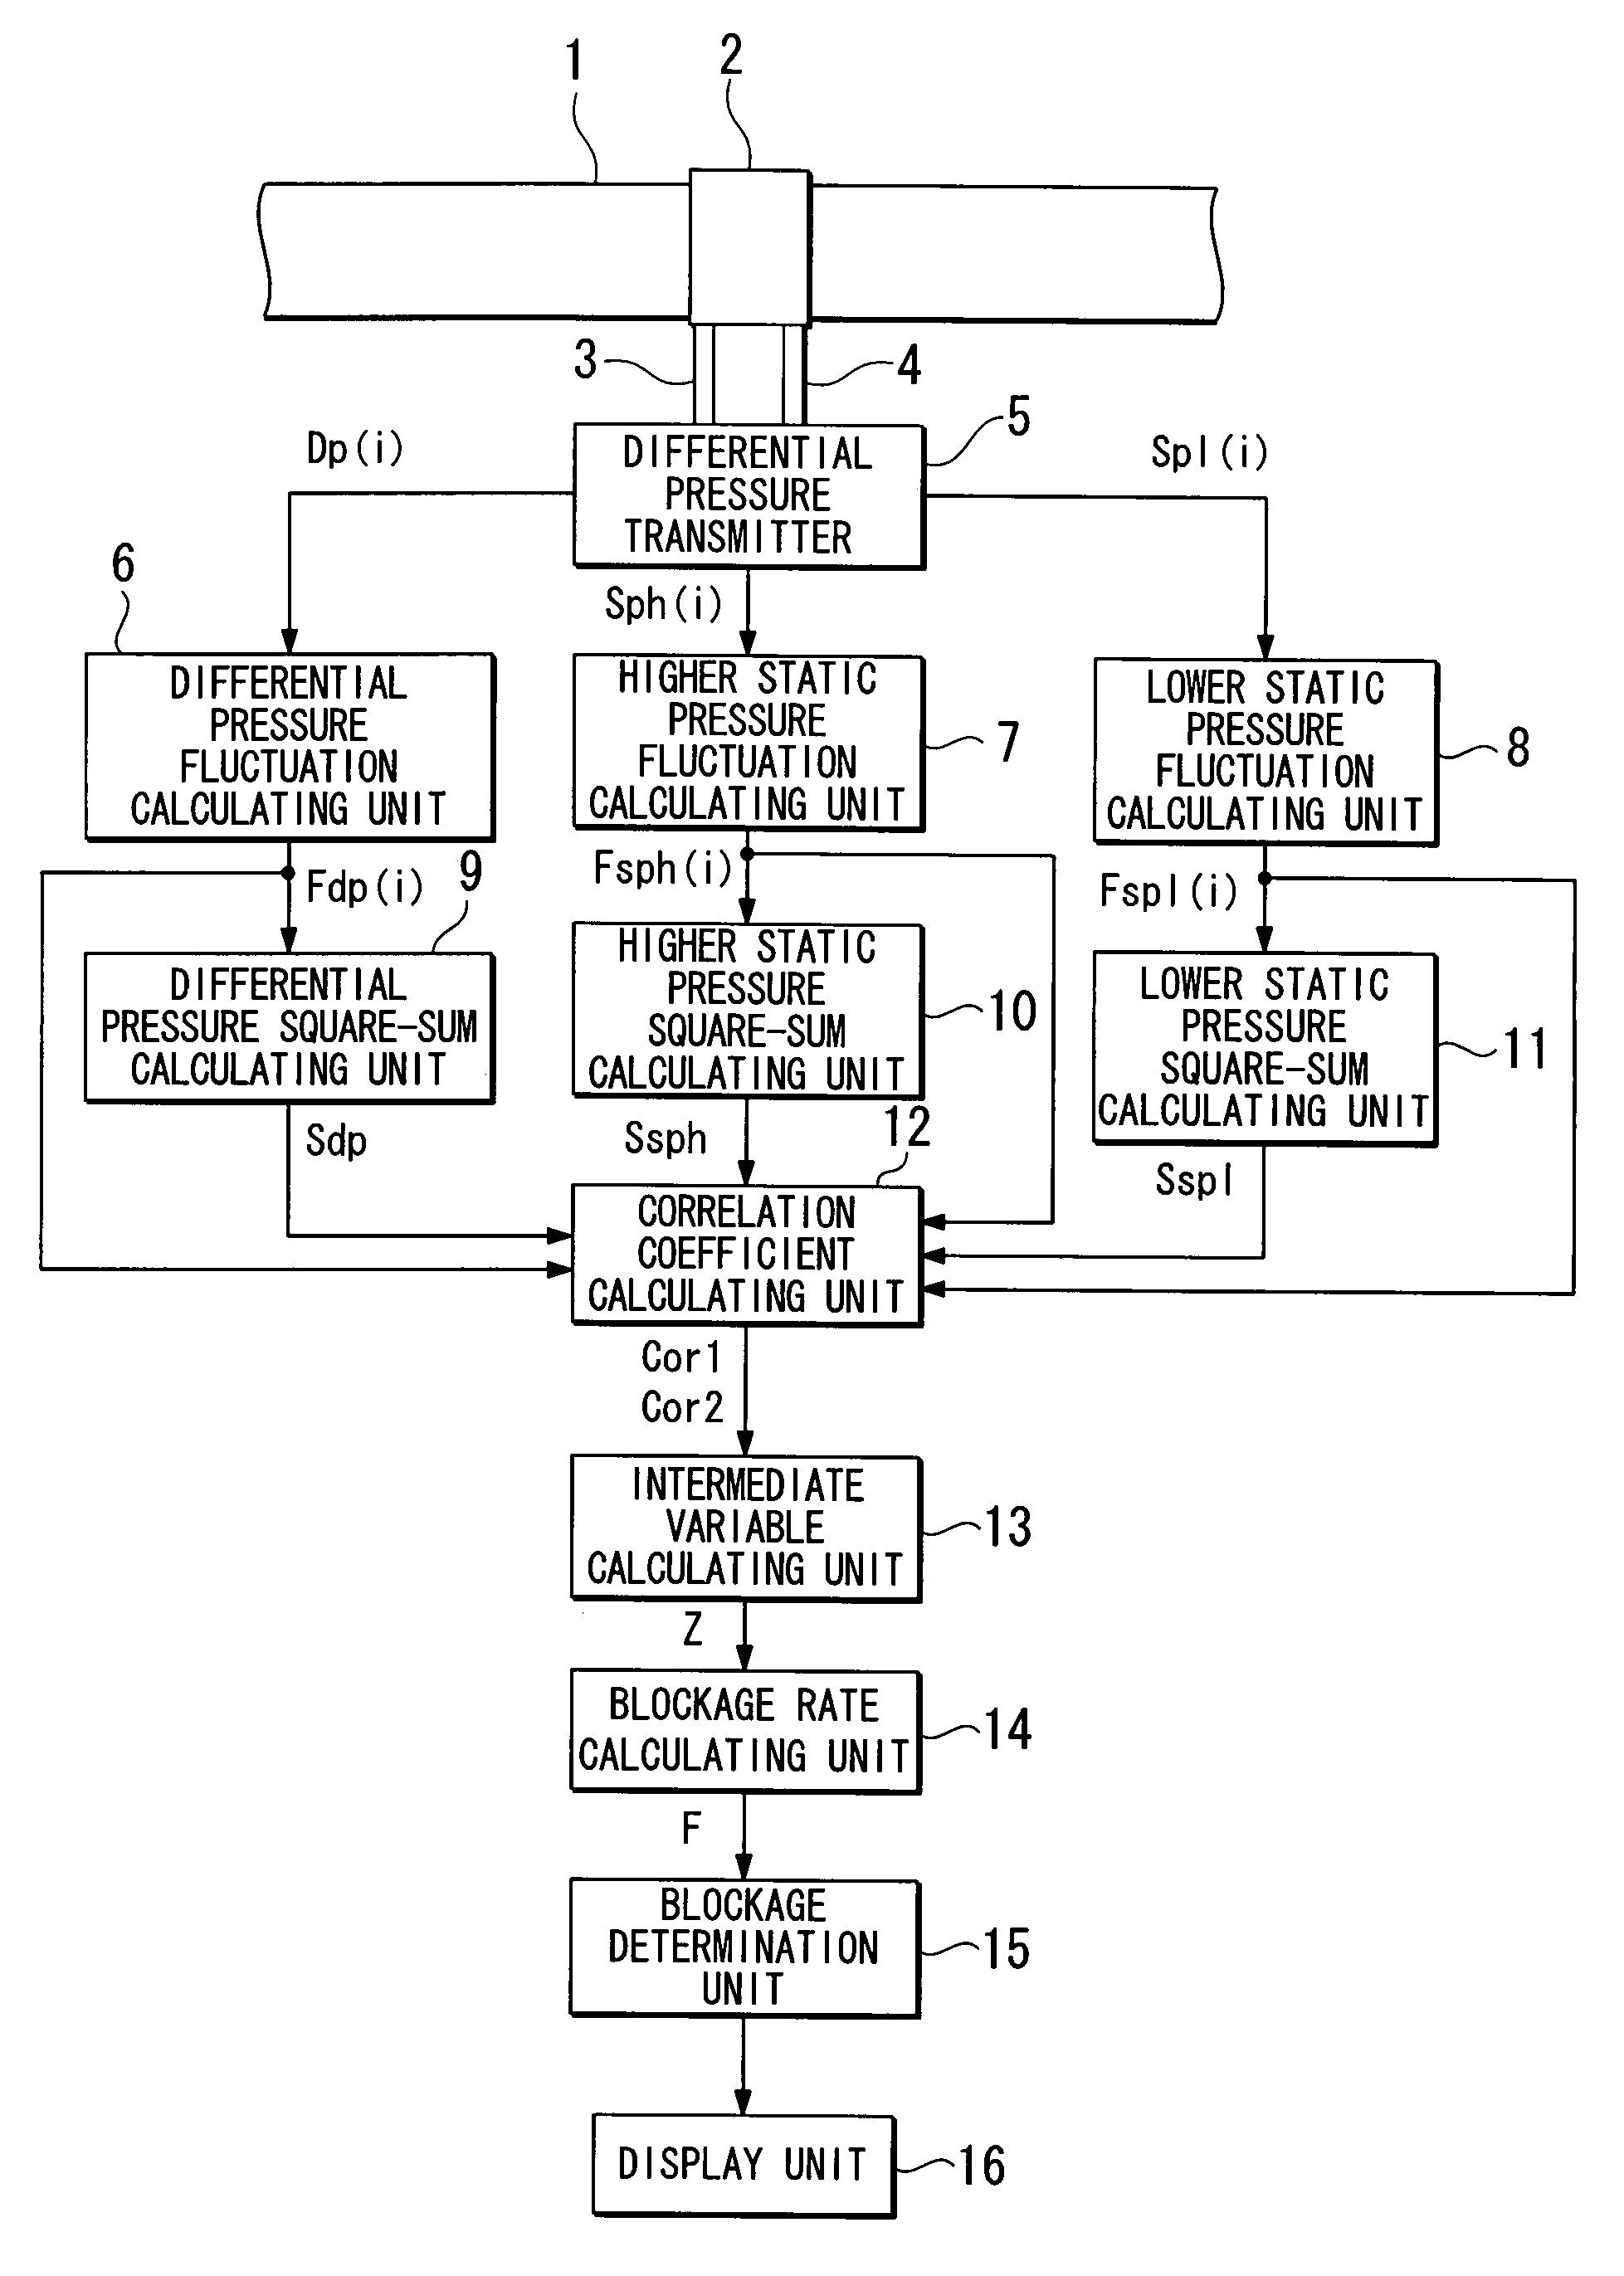 Apparatus and method for detecting blockage of impulse lines